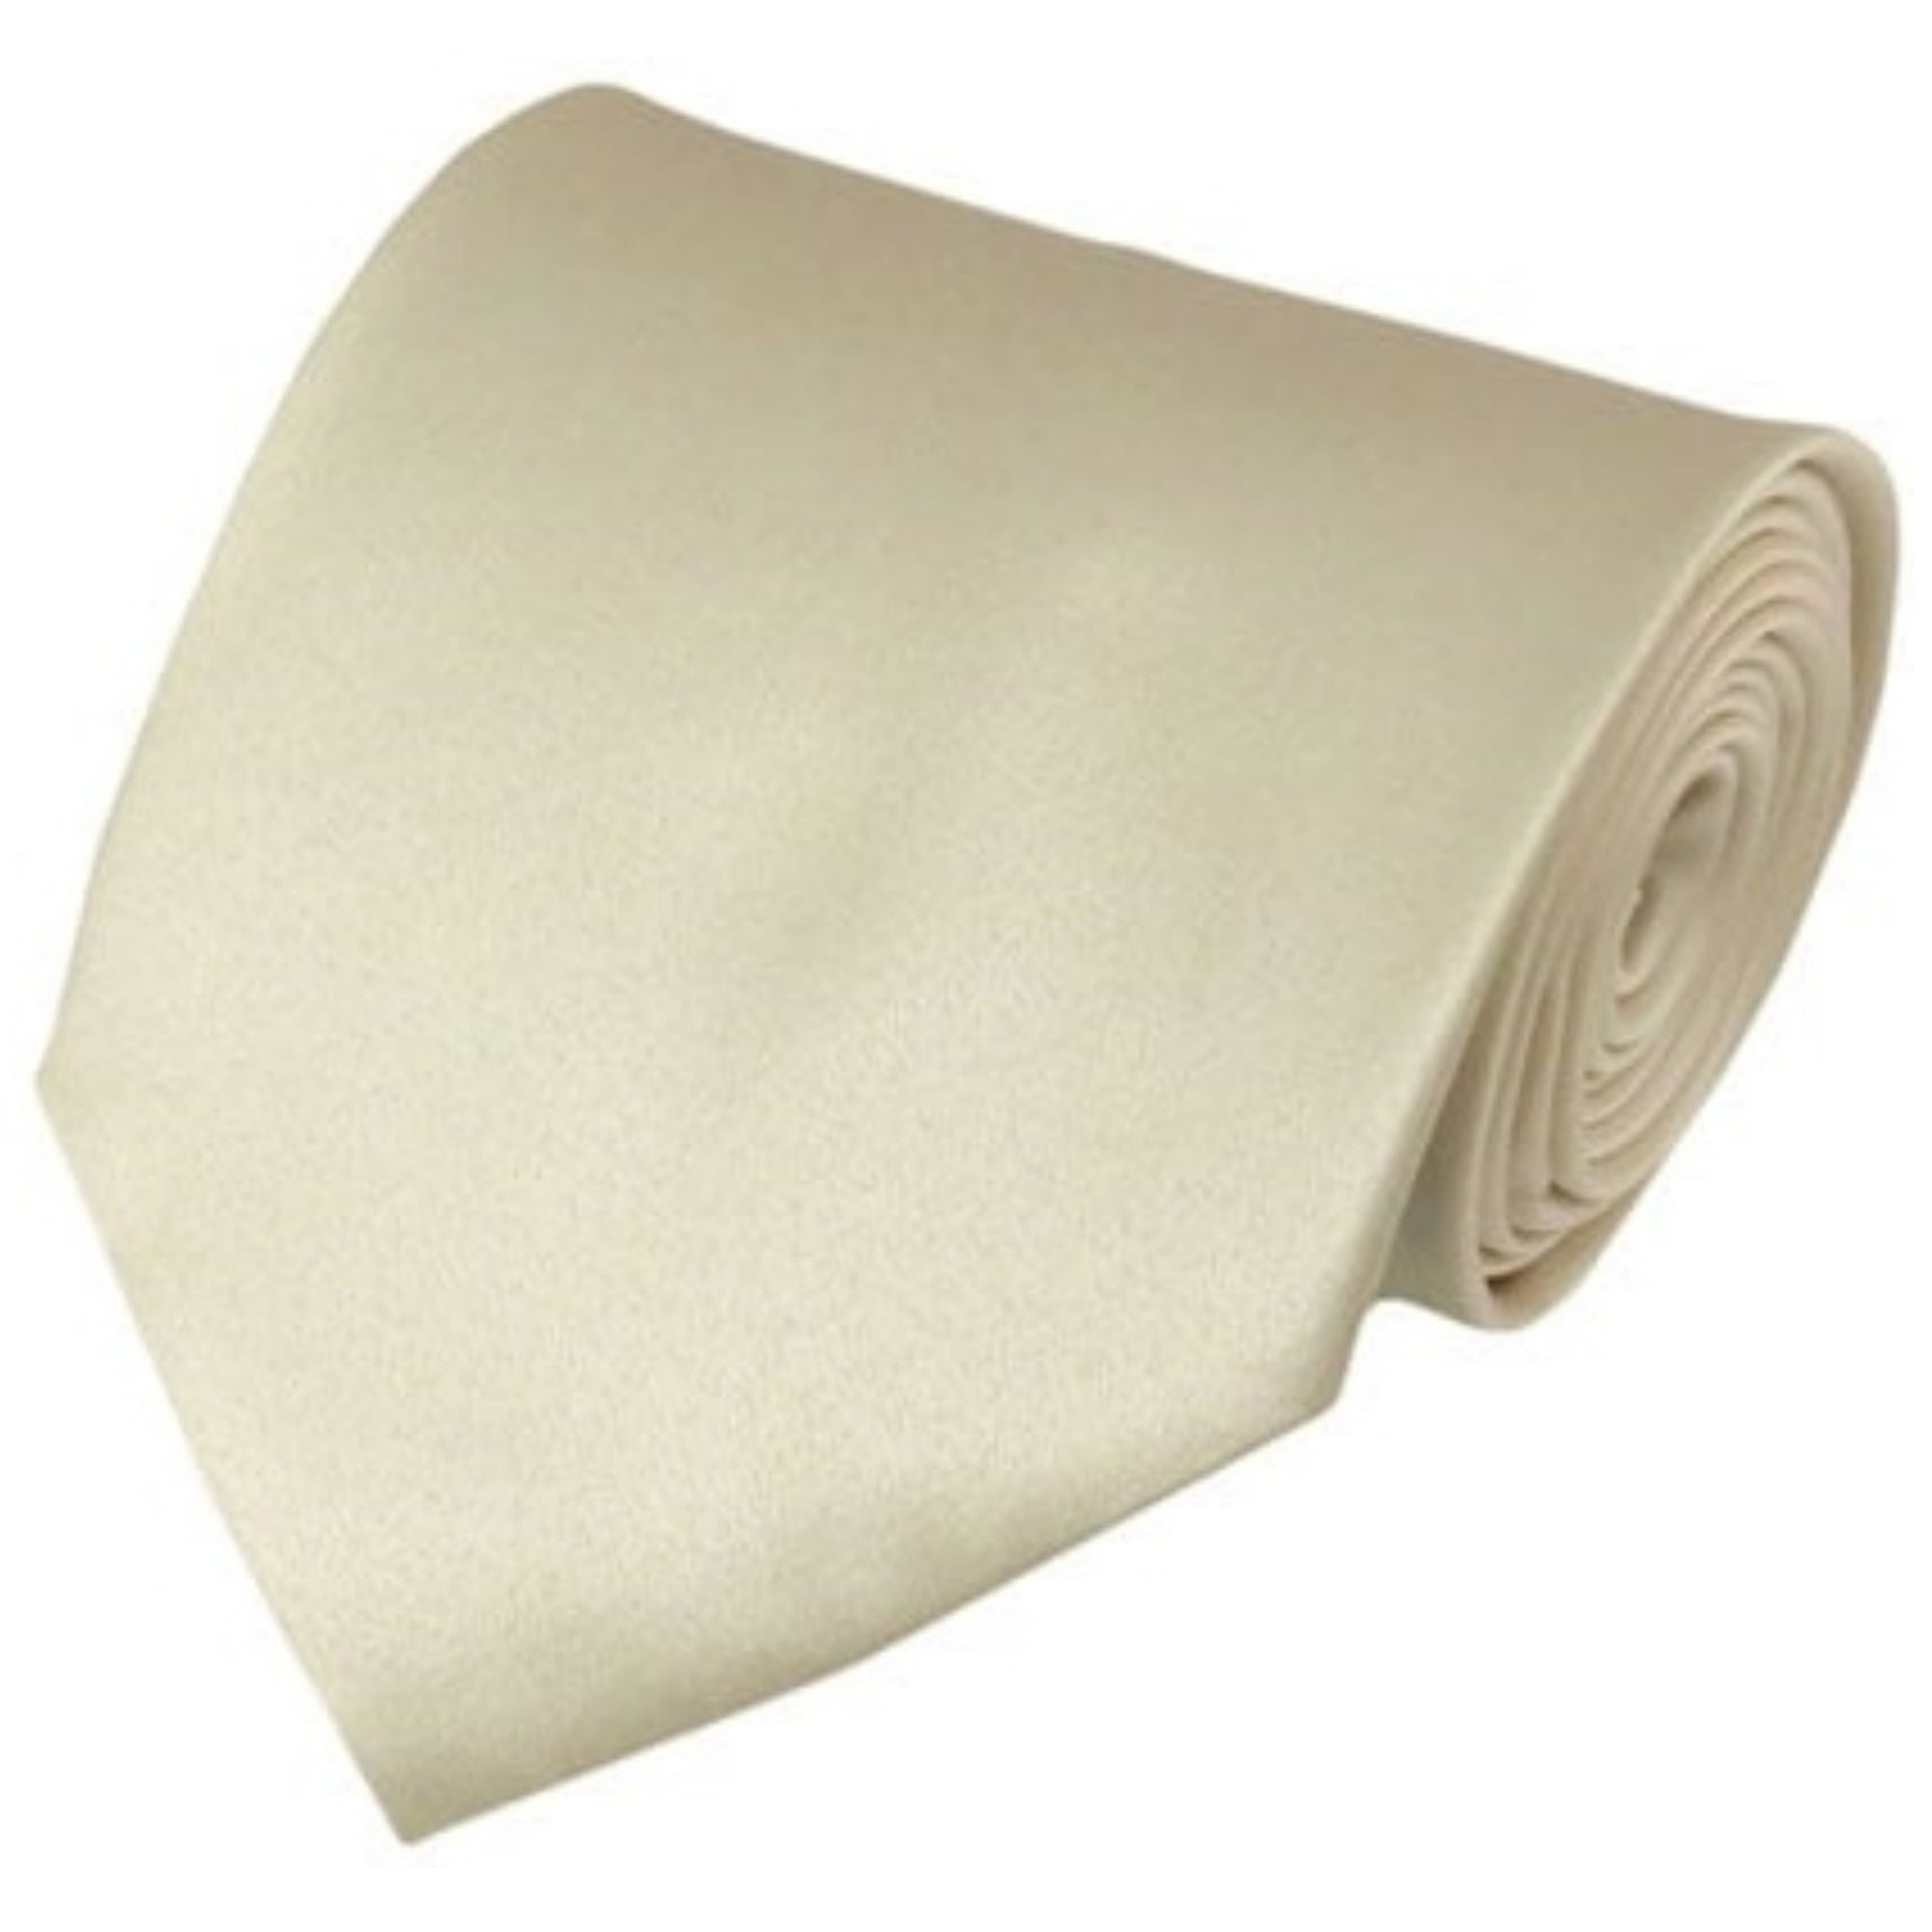 TheDapperTie Solid Color 3.5 Inch Wide And 62 Inch Extra Long Necktie For Big & Tall Men Neck Tie TheDapperTie Ivory  